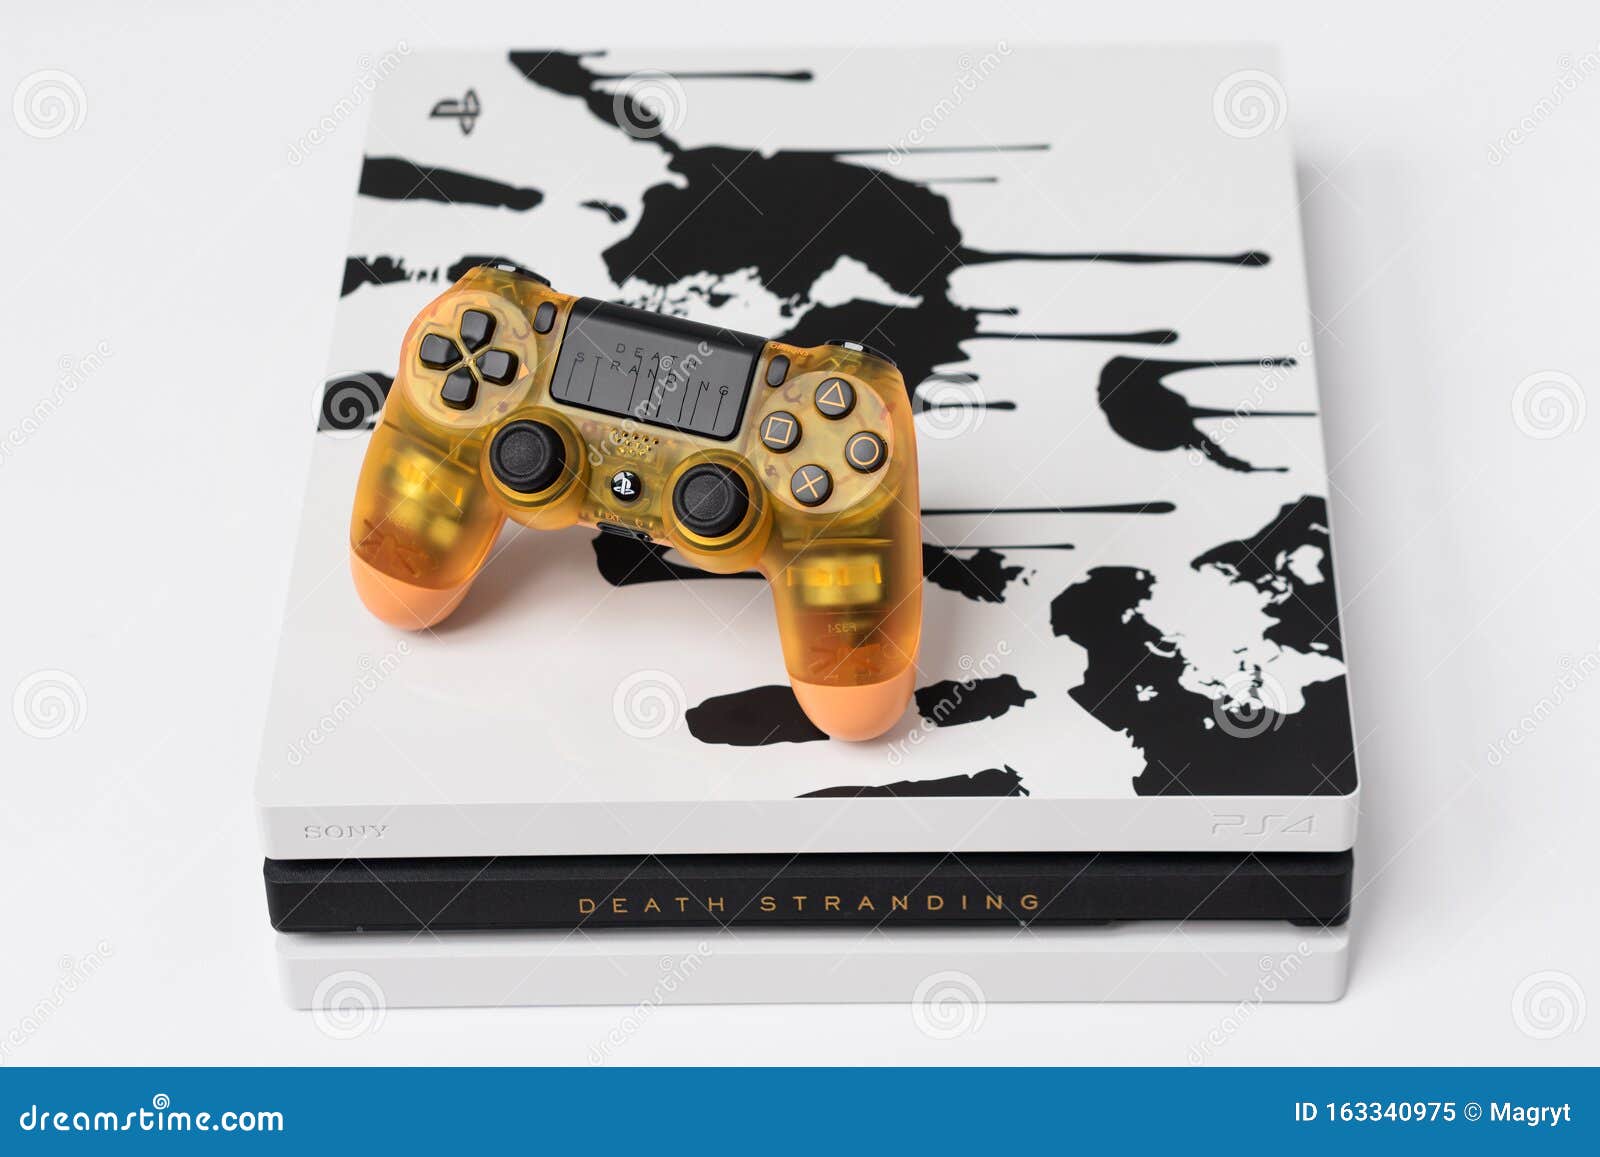 ps4 pro limited edition 2019